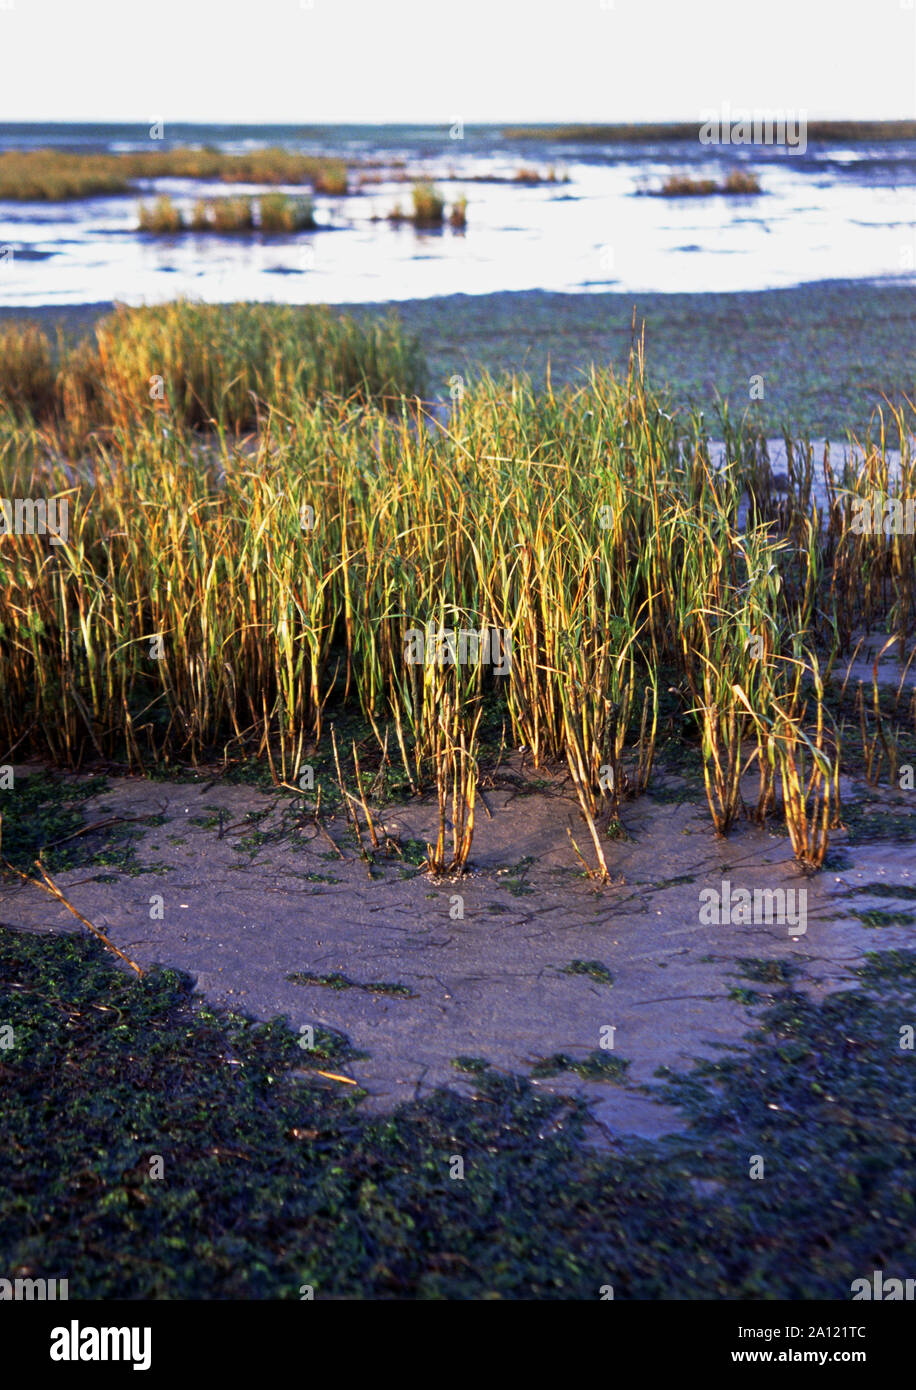 France. Dept.Gironde. Bay of Arcachon. Spartina x  townsendii colonizing mud flats. Stock Photo